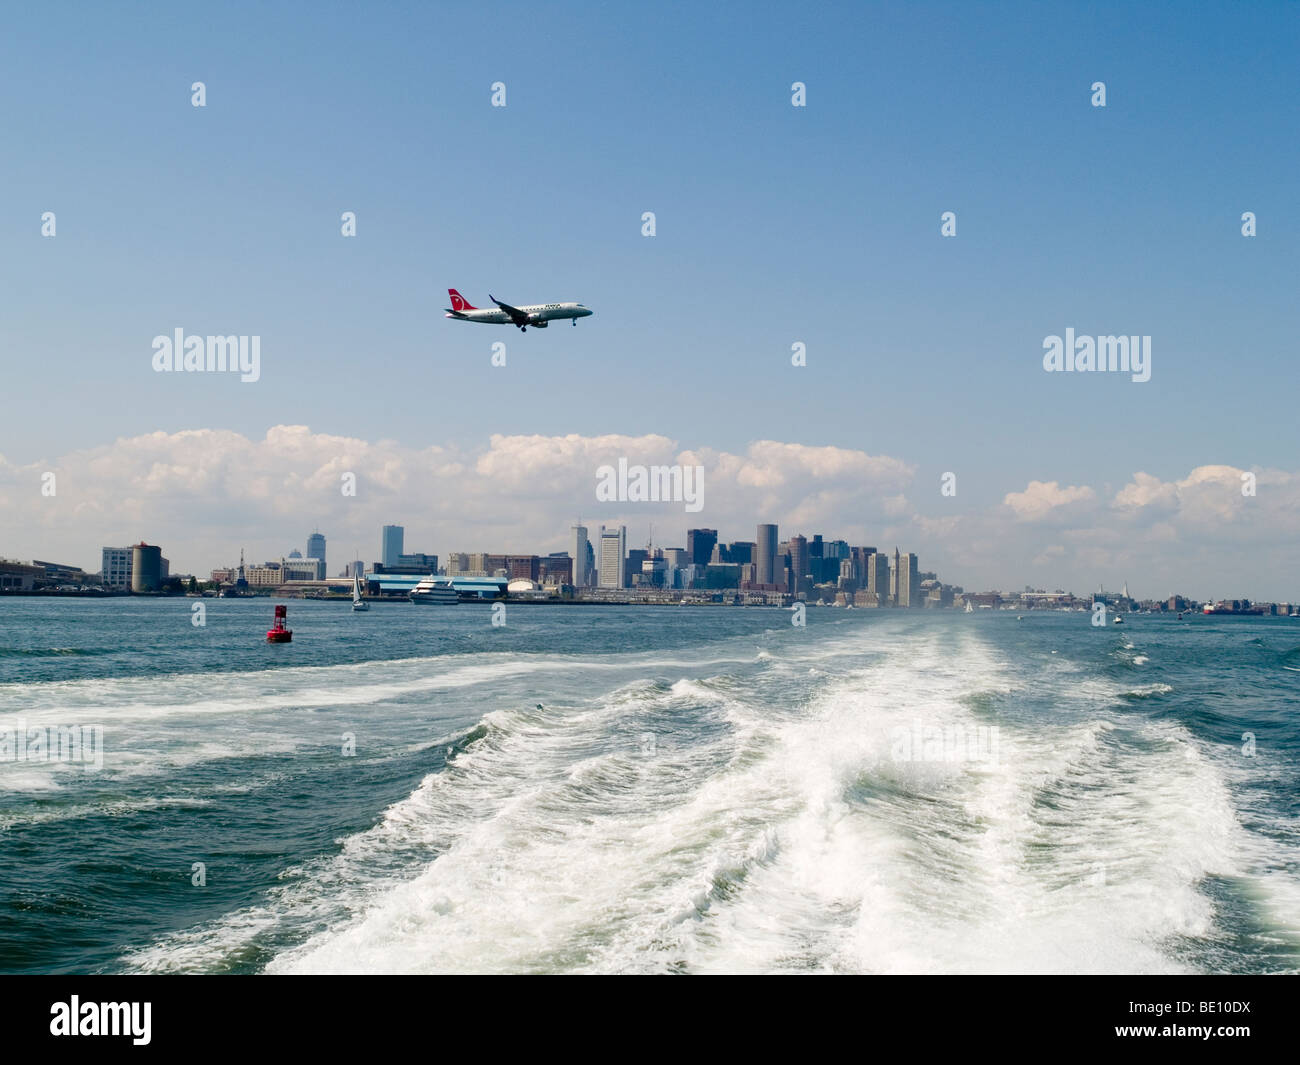 A plane coming in to land at Logan International Airport in Boston, Massachusetts USA Stock Photo